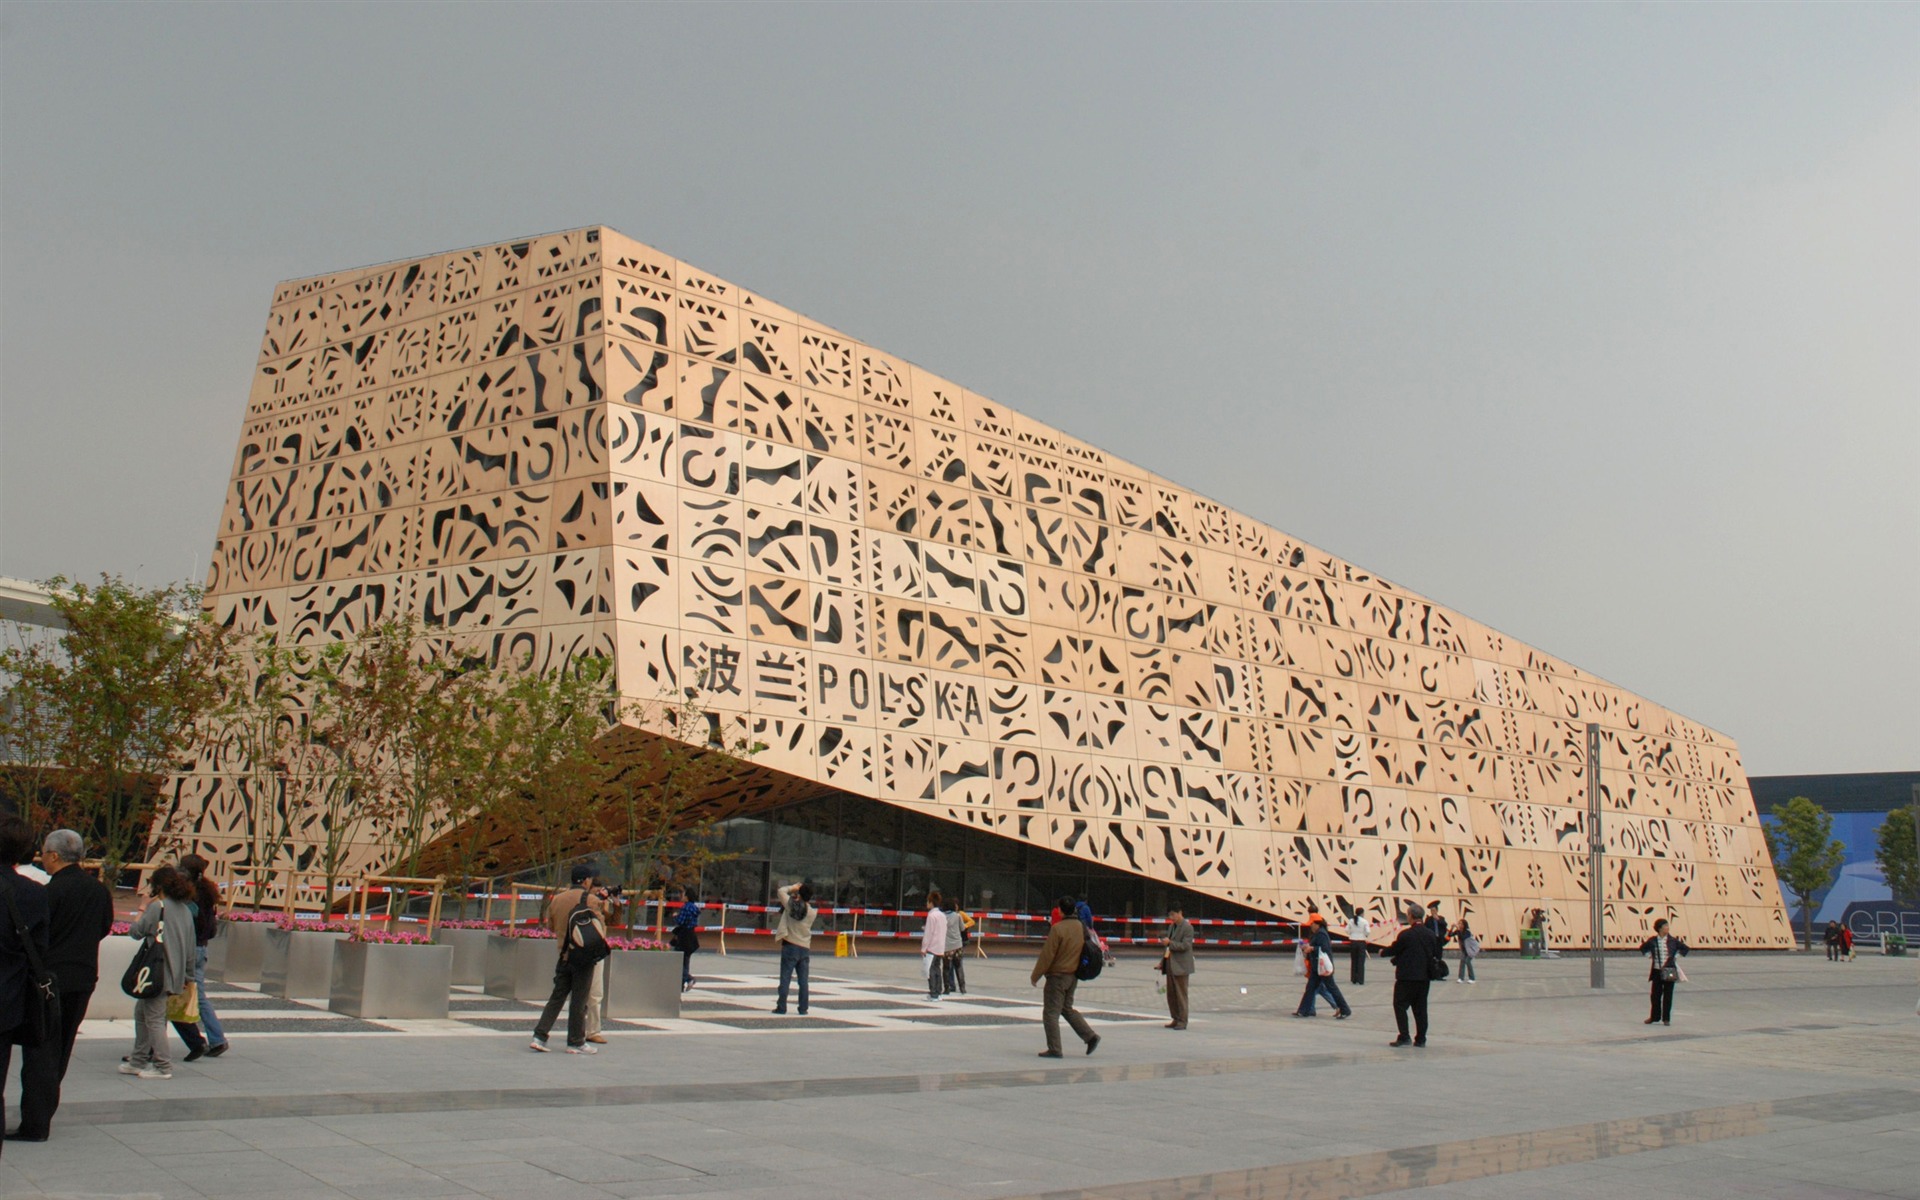 Commissioning of the 2010 Shanghai World Expo (studious works) #25 - 1920x1200